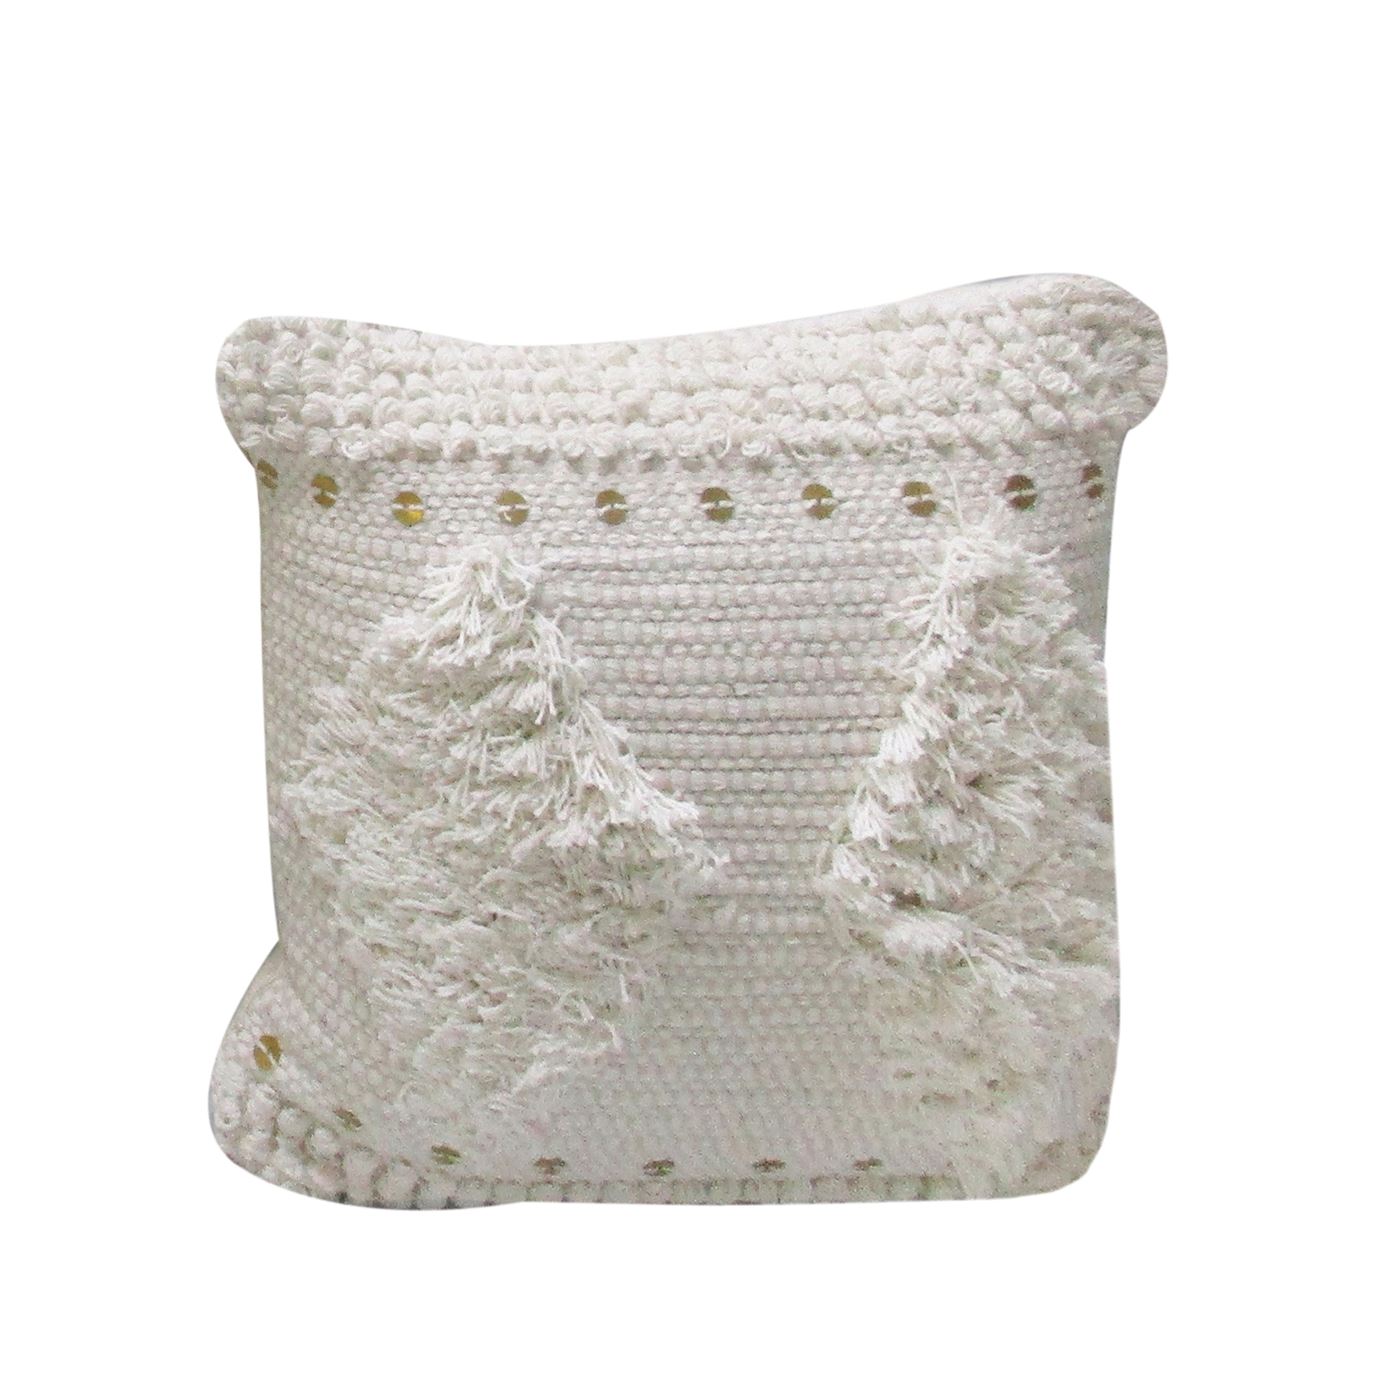 Pontar Pillow, Cotton, Metal Sequins, Natural White, Pitloom, Cut And Loop